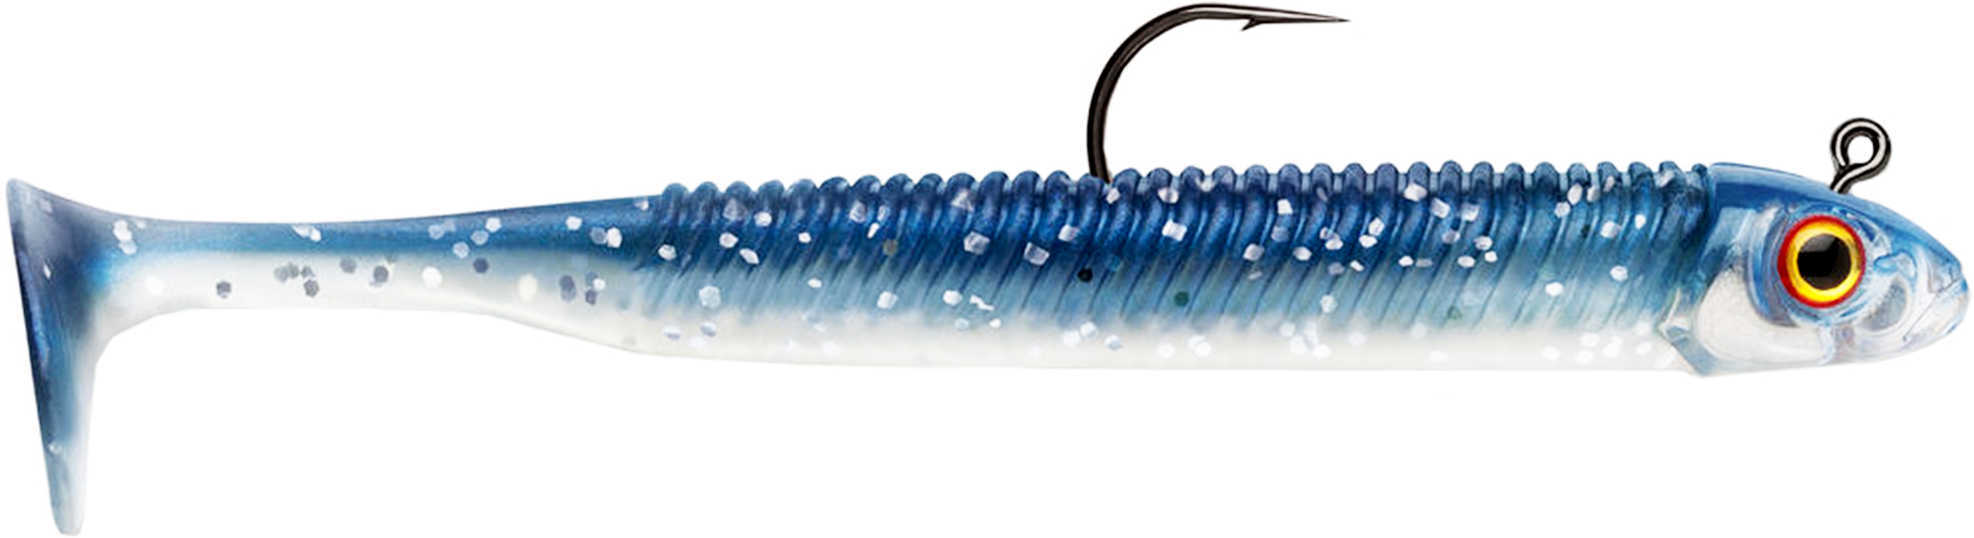 Storm 360GT Searchbait Lure 5.5-Inches, 3/8 Ounces Weight, Tru Blue, Pack Of 1 Md: SBM55TB-38J